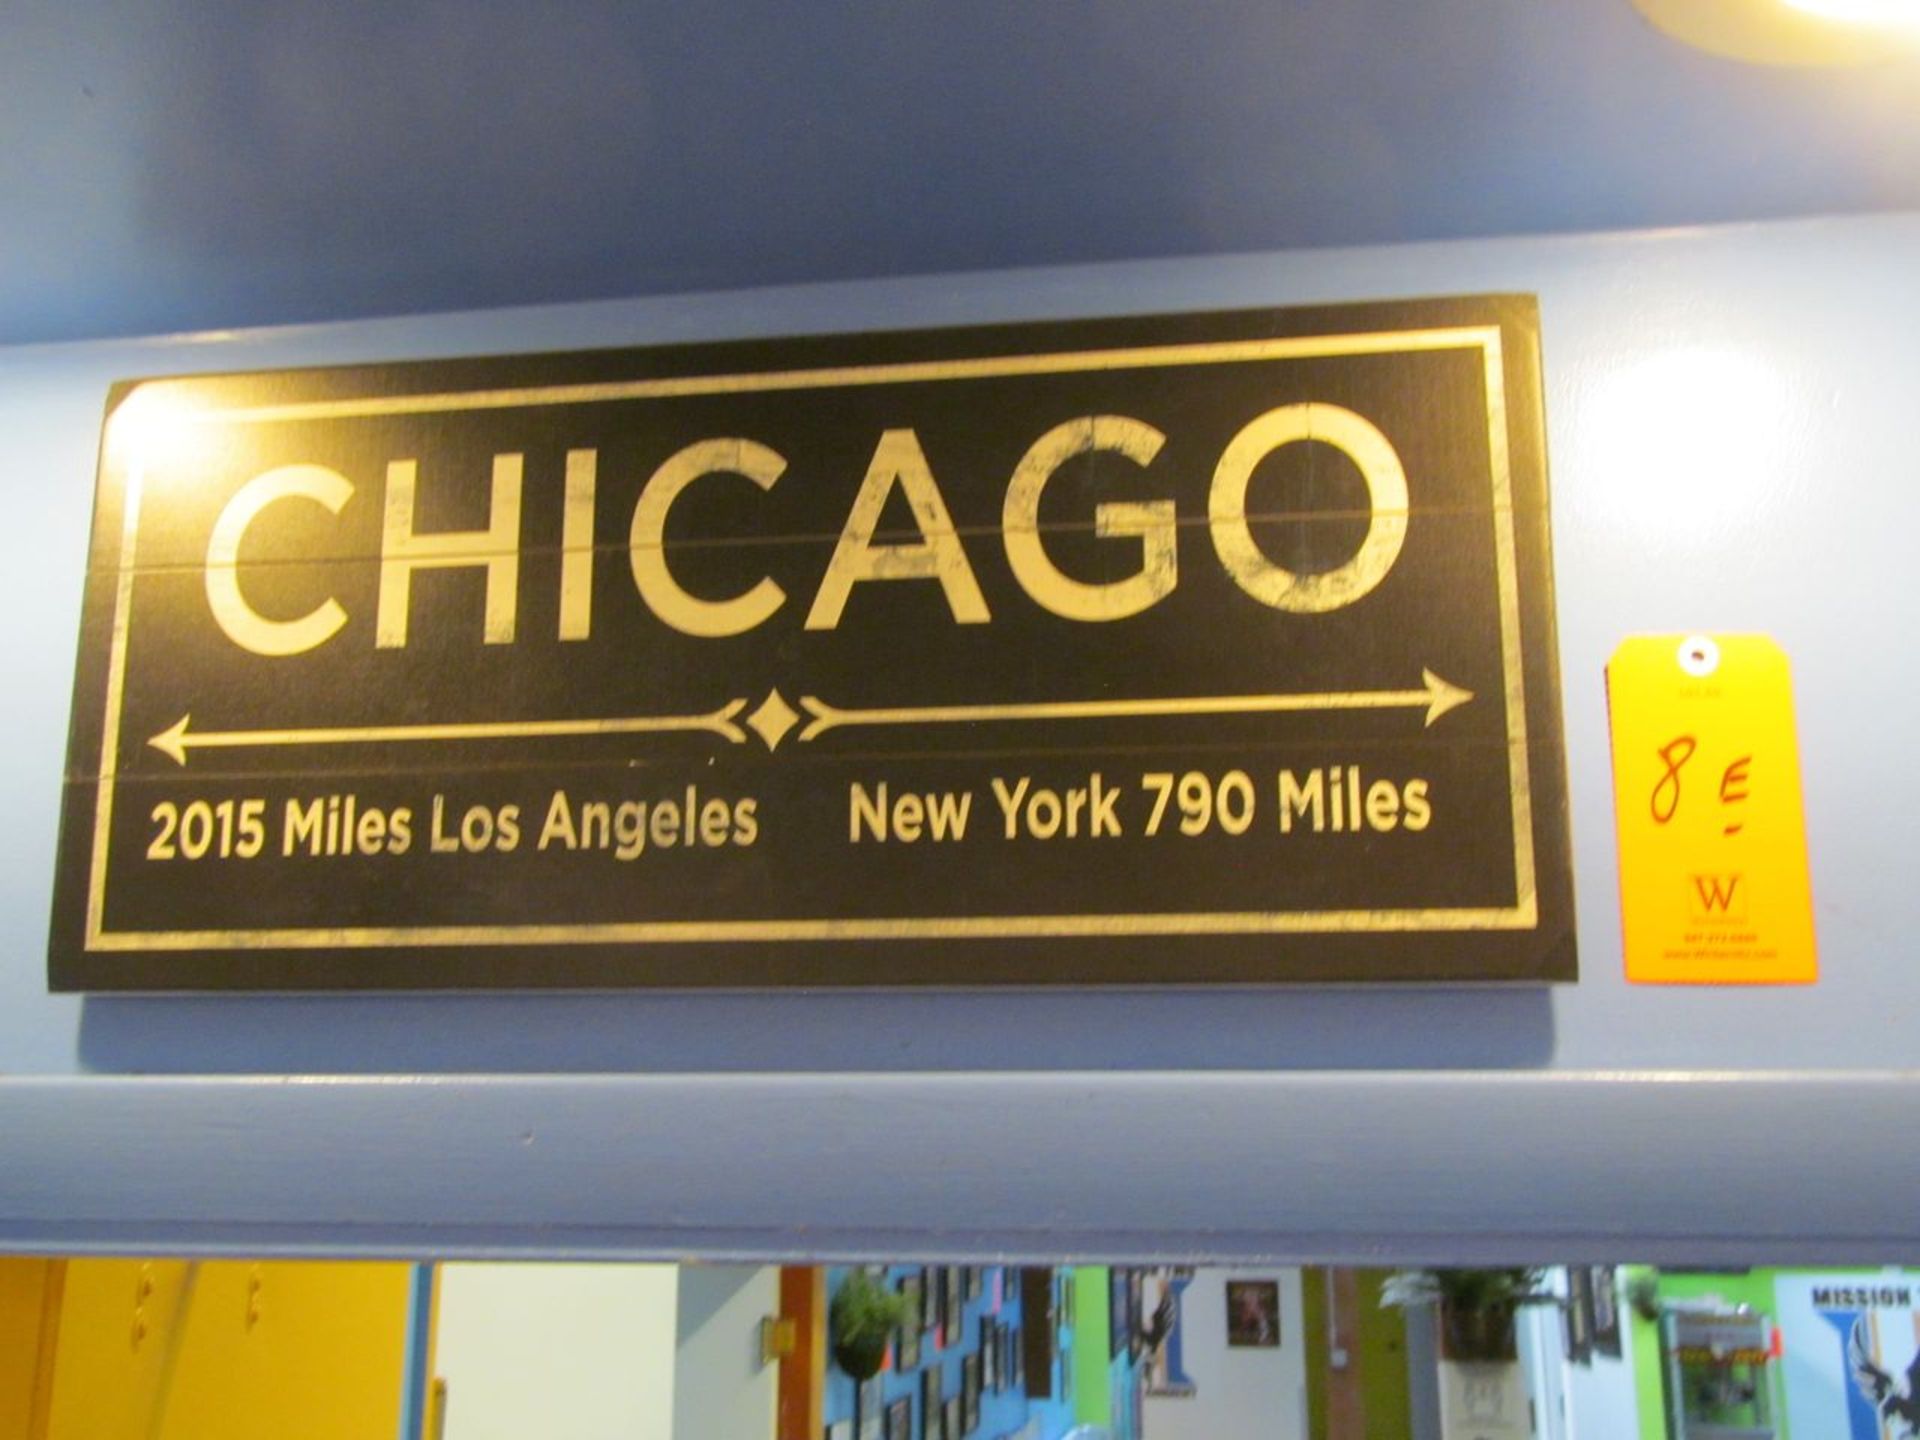 Sign, Chicago: Los Angeles - New York